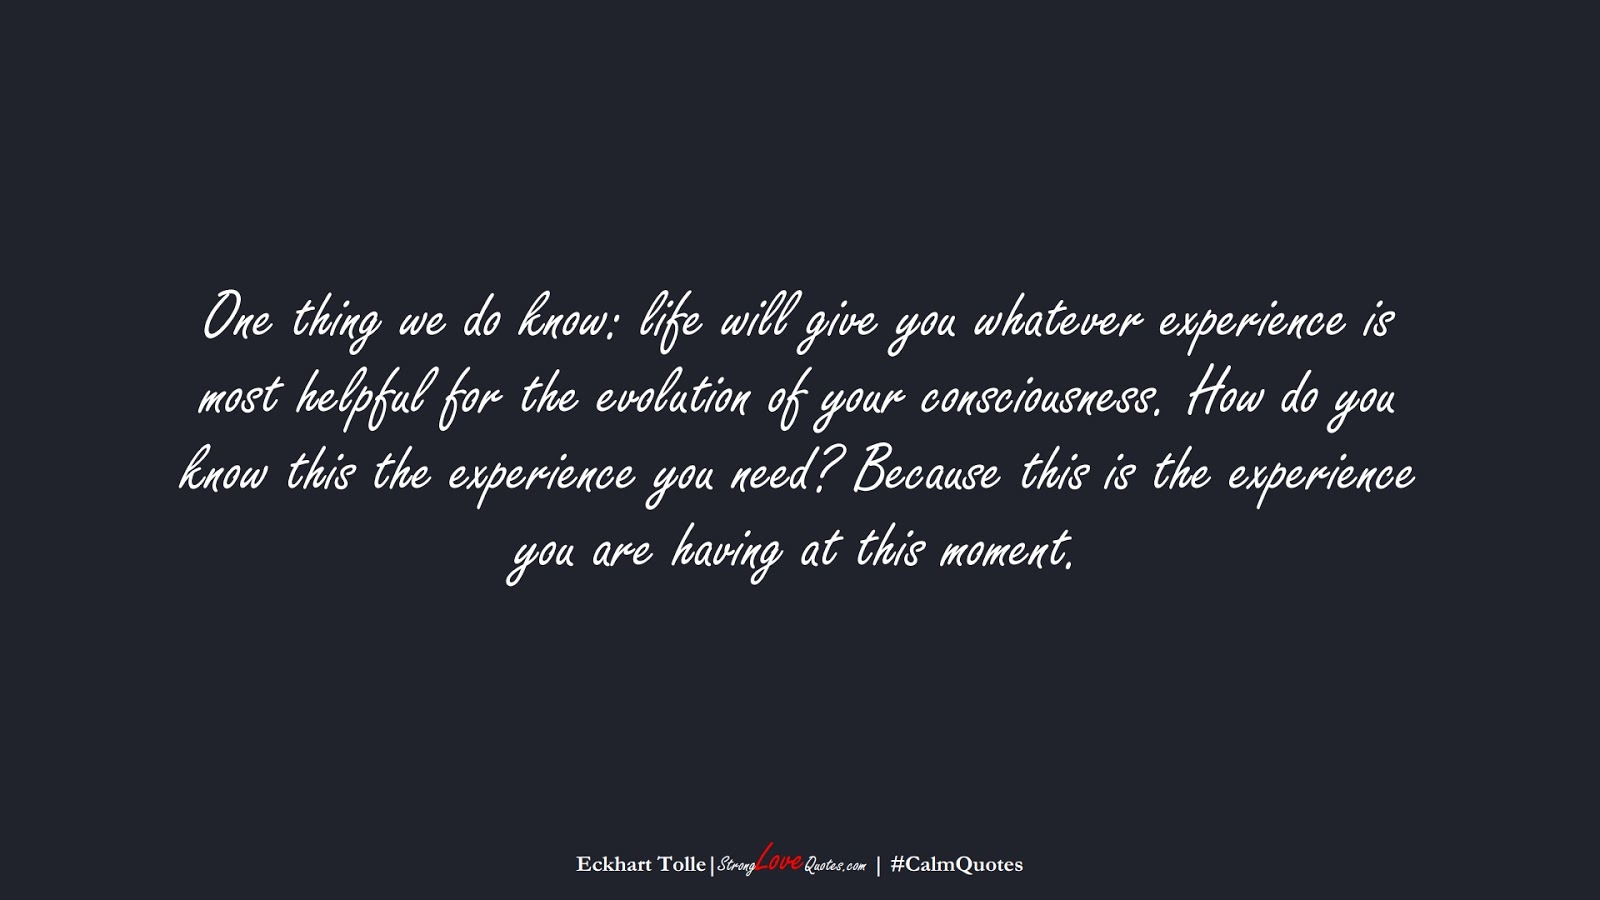 One thing we do know: life will give you whatever experience is most helpful for the evolution of your consciousness. How do you know this the experience you need? Because this is the experience you are having at this moment. (Eckhart Tolle);  #CalmQuotes